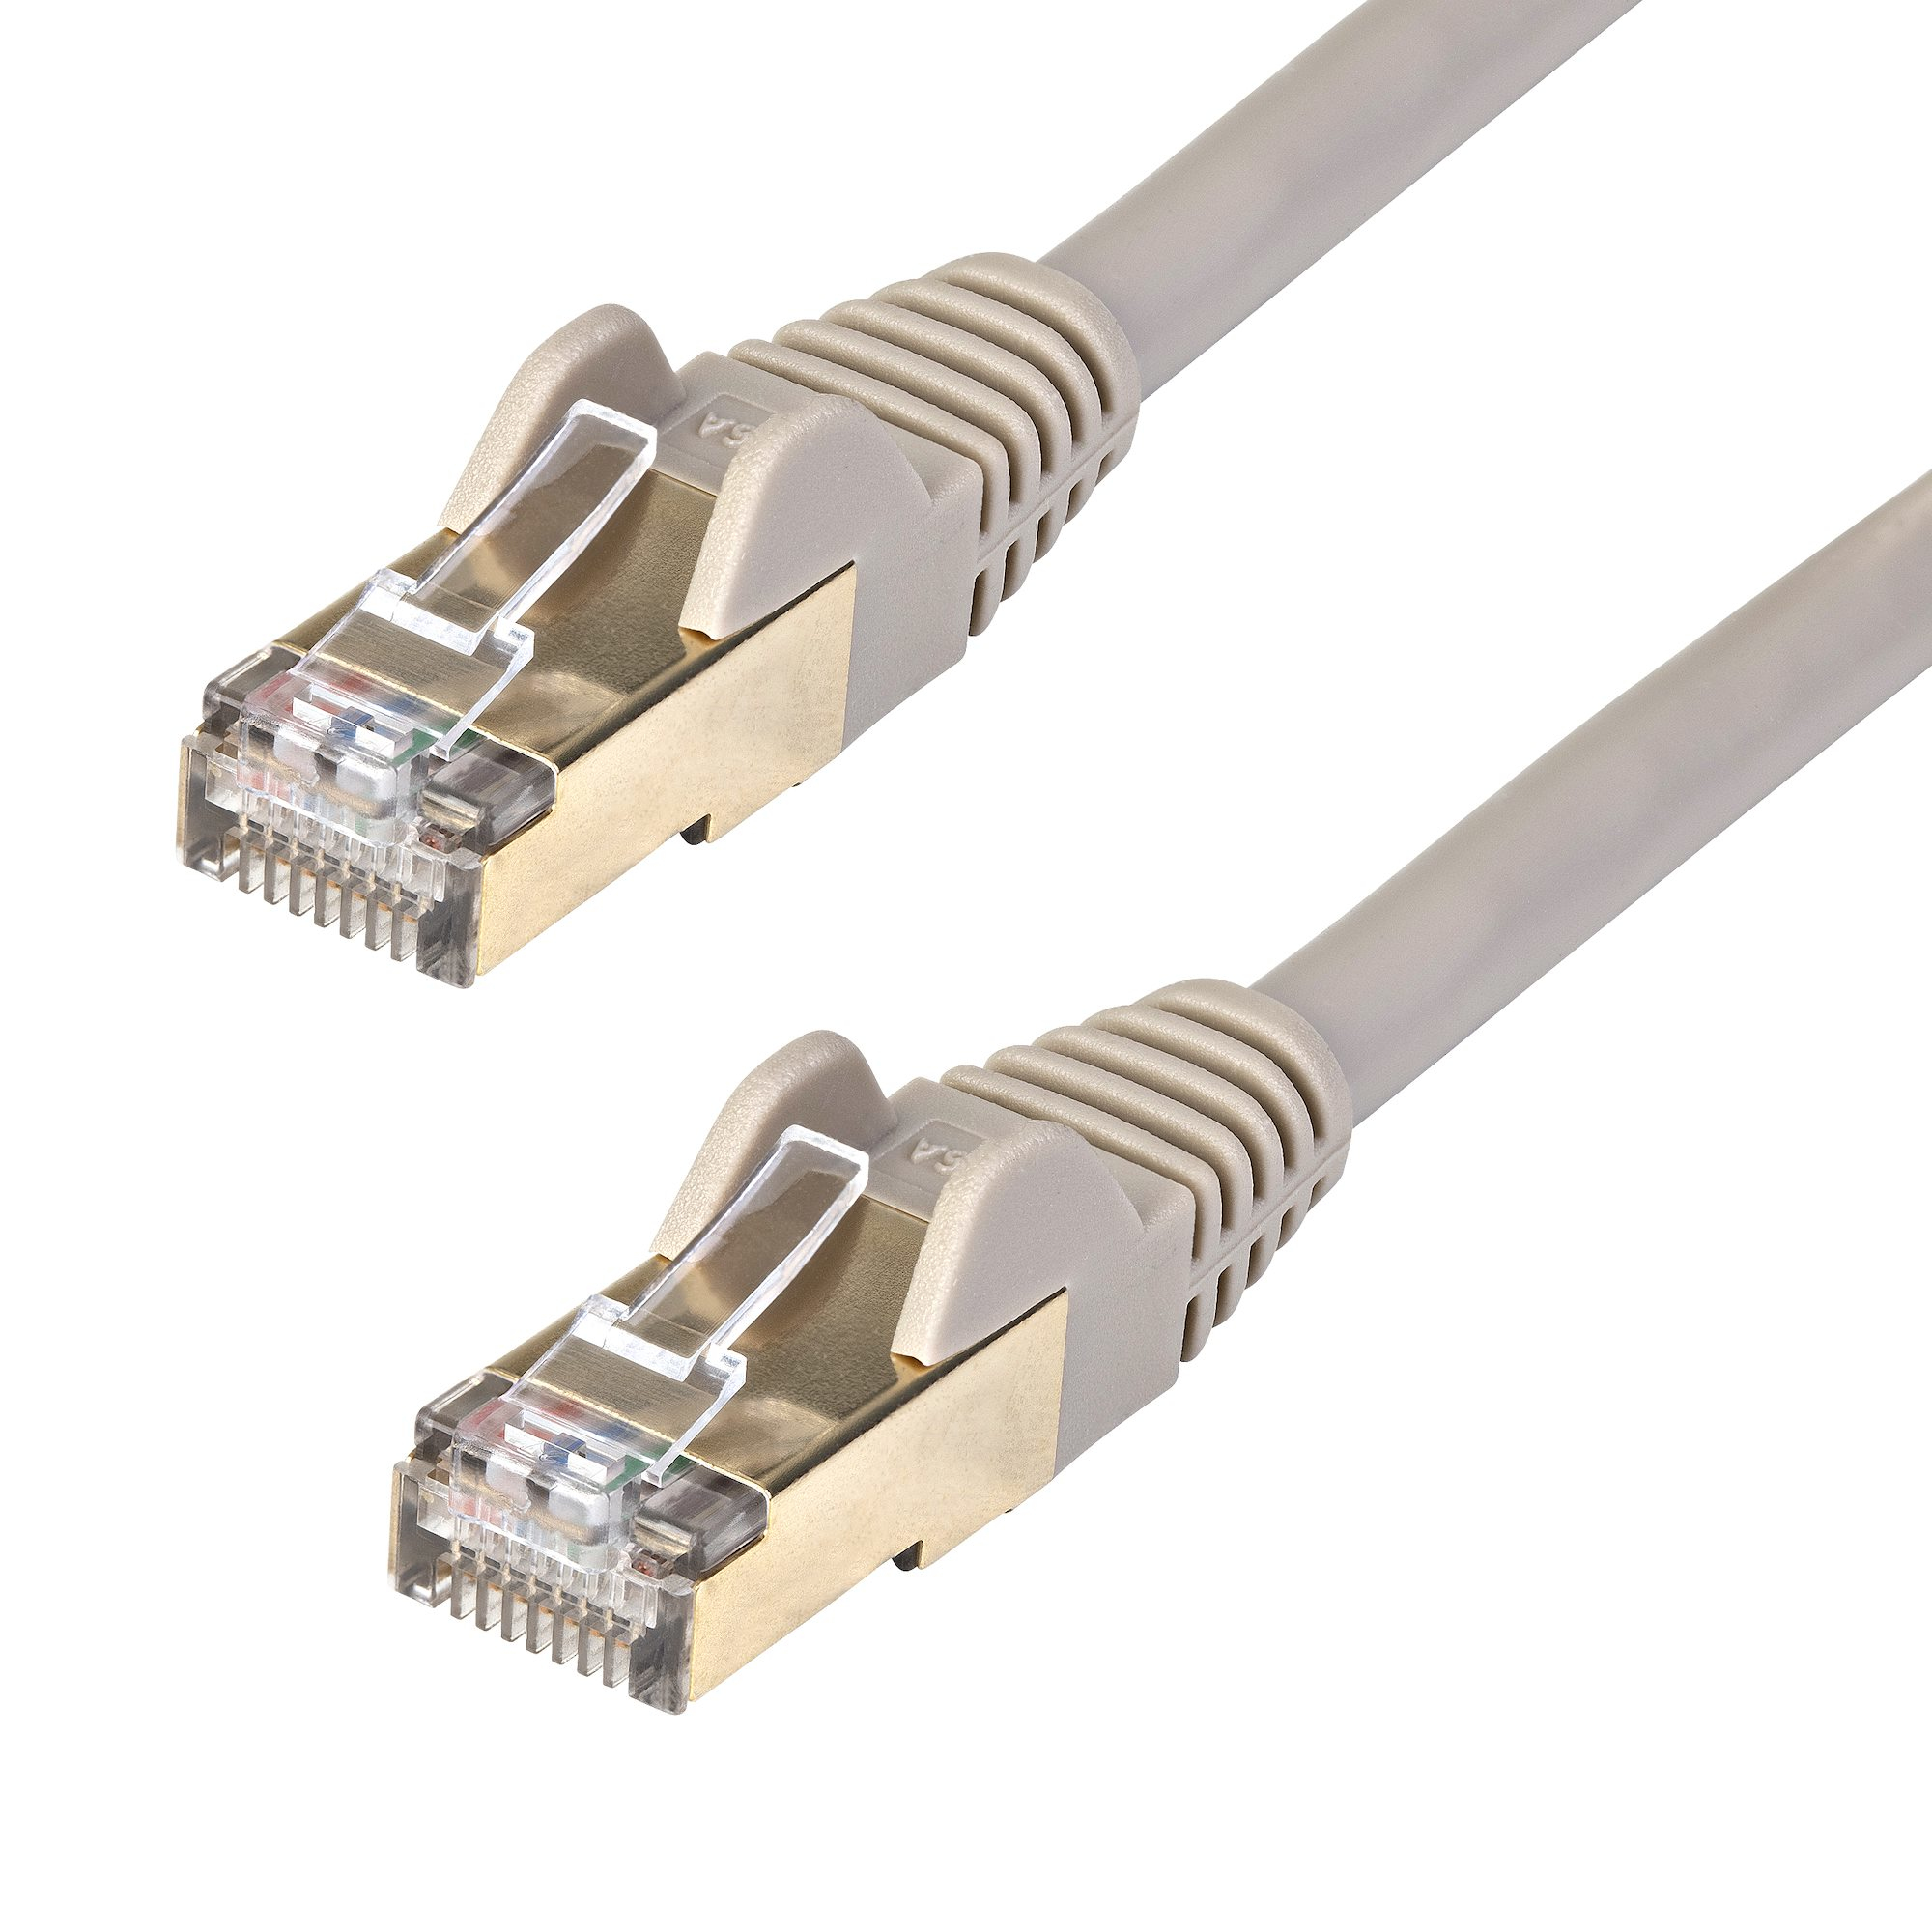 StarTech.com 10m CAT6A Ethernet Cable, 10 Gigabit Shielded Snagless RJ45 100W PoE Patch Cord, CAT 6A 10GbE STP Network Cable w/Strain Relief, Grey, Fluke Tested/UL Certified Wiring/TIA - Category 6A - 26AWG (6ASPAT10MGR)